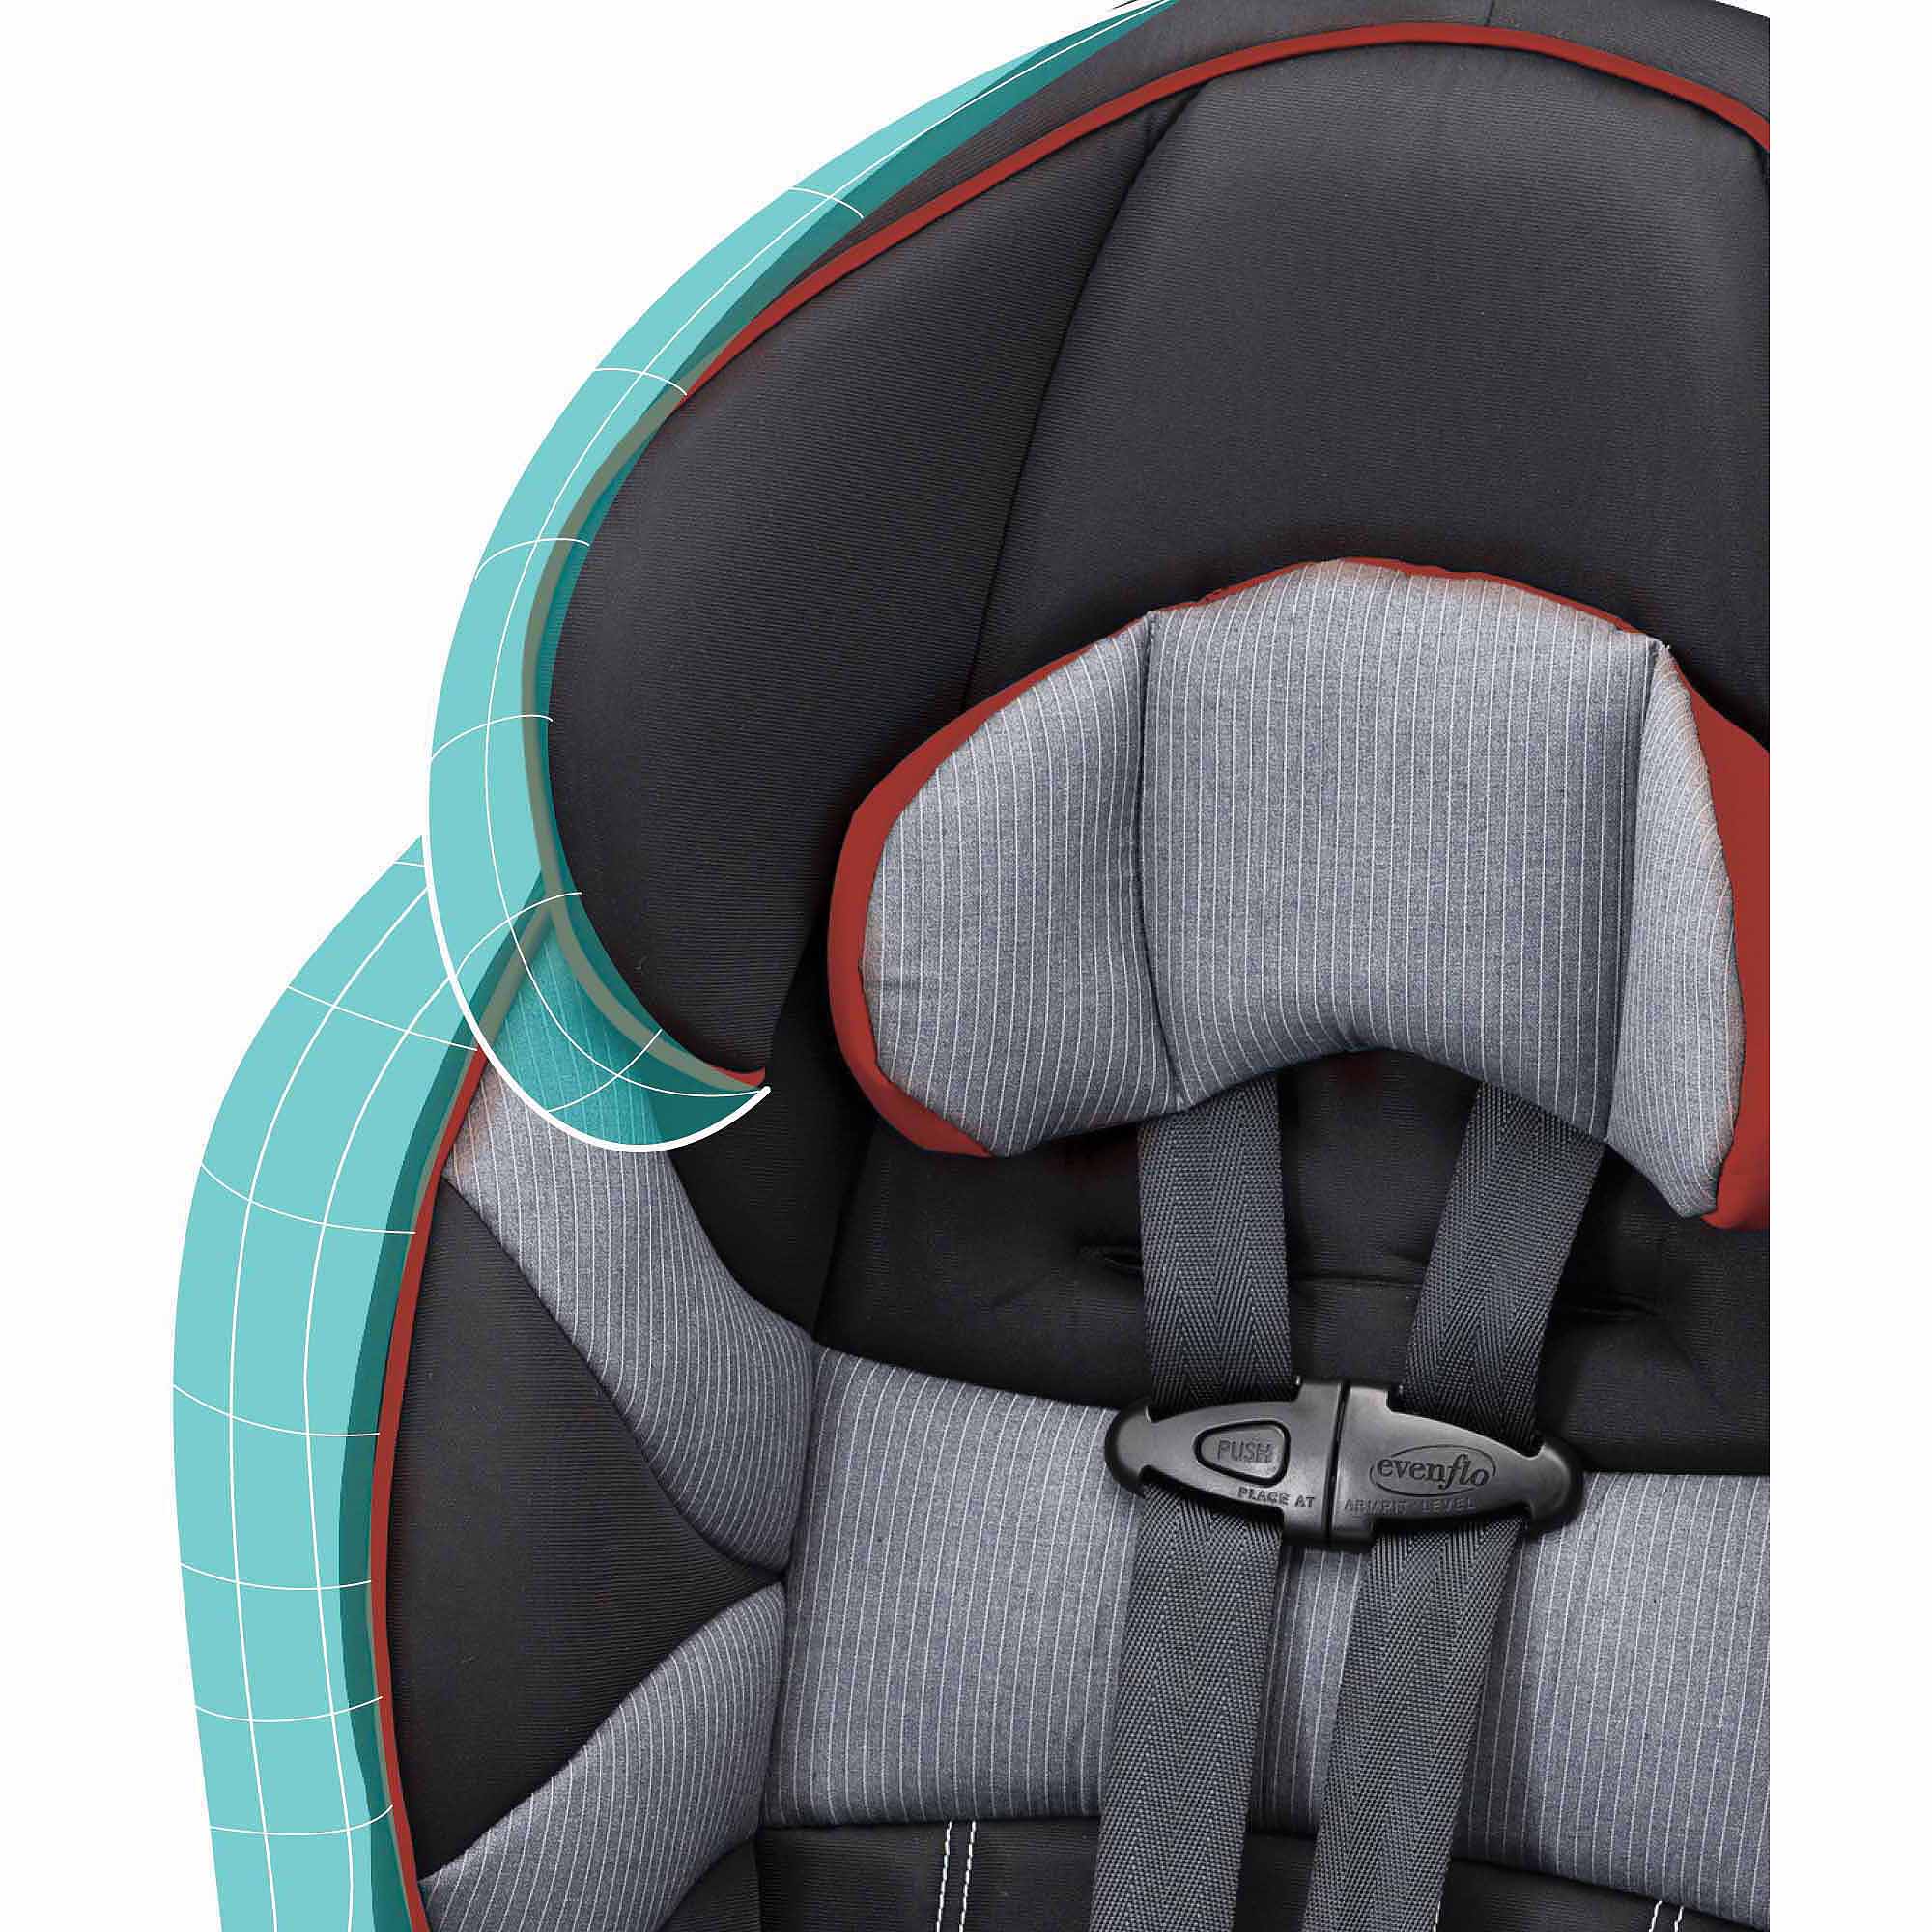 Evenflo Maestro Harness Booster Car Seat, choose your color - image 4 of 6